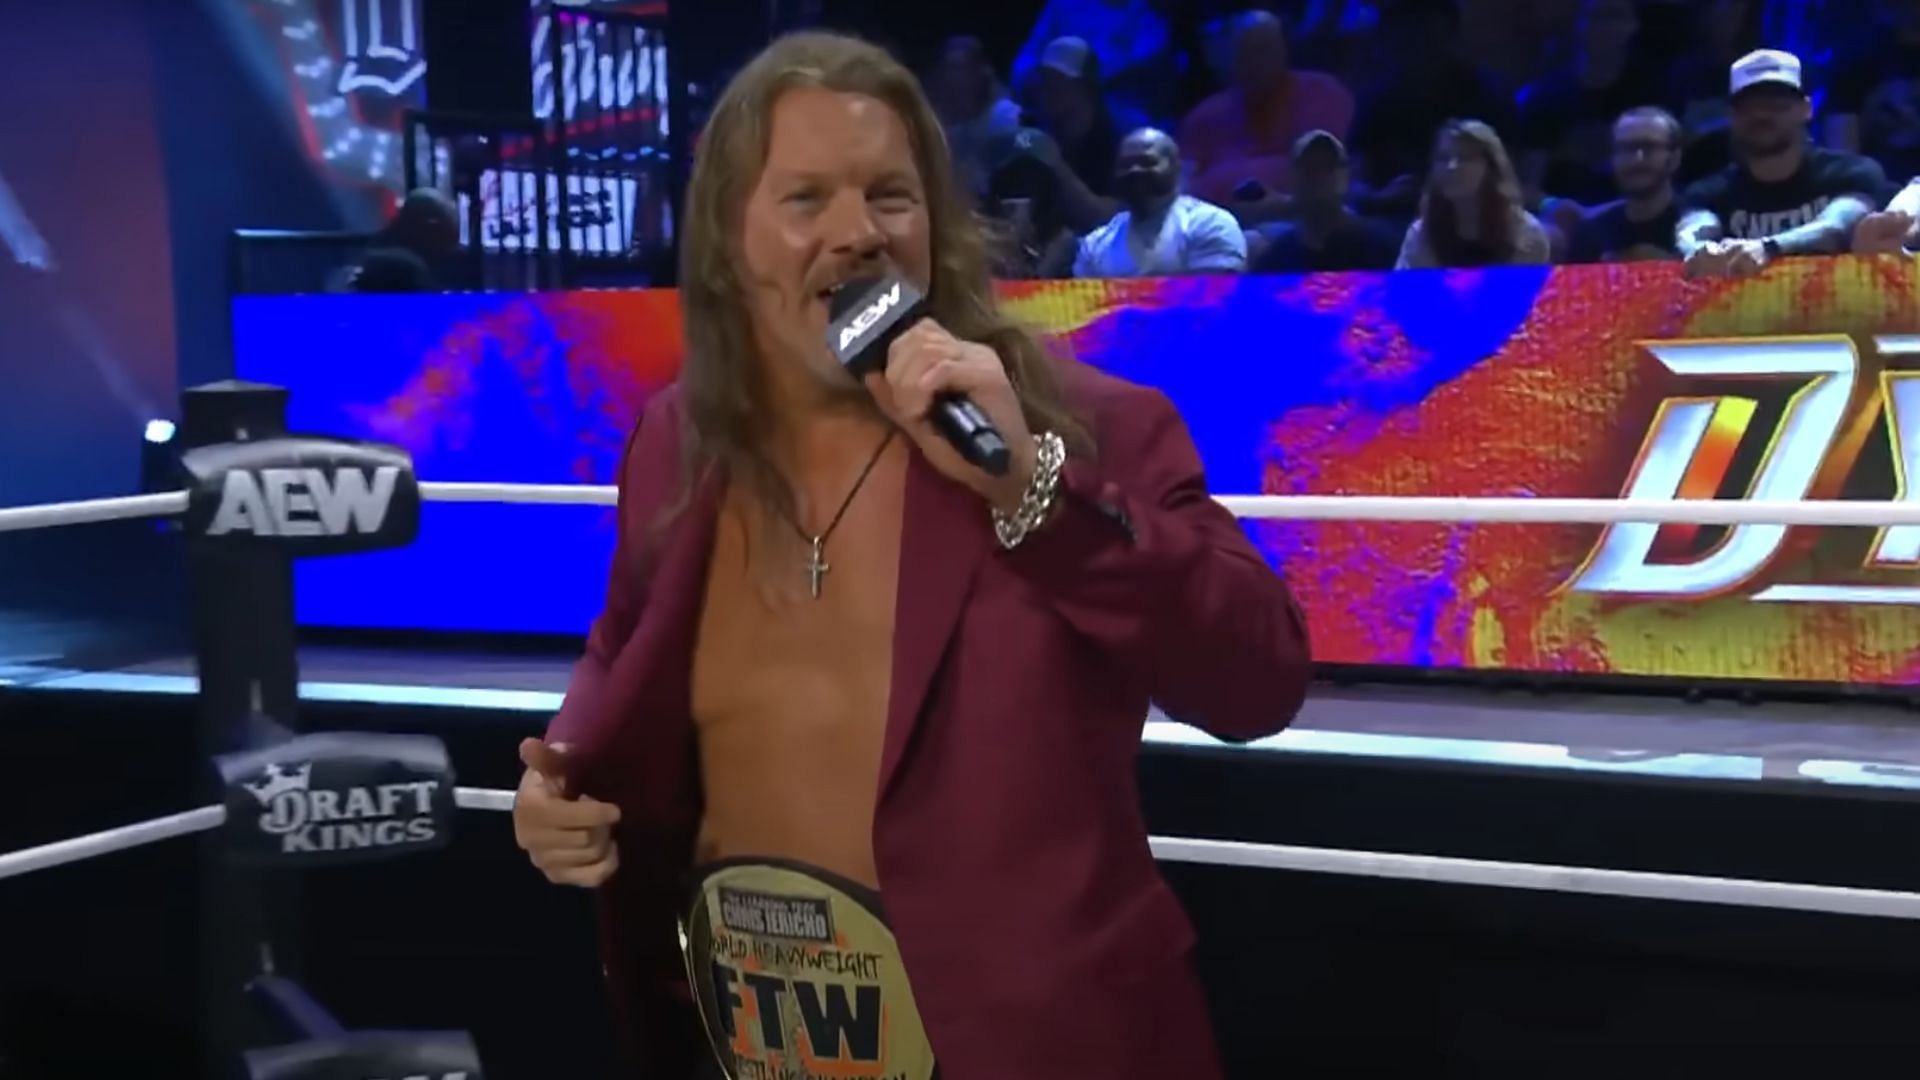 Chris Jericho is the reigning FTW Champion [Image Credits: AEW